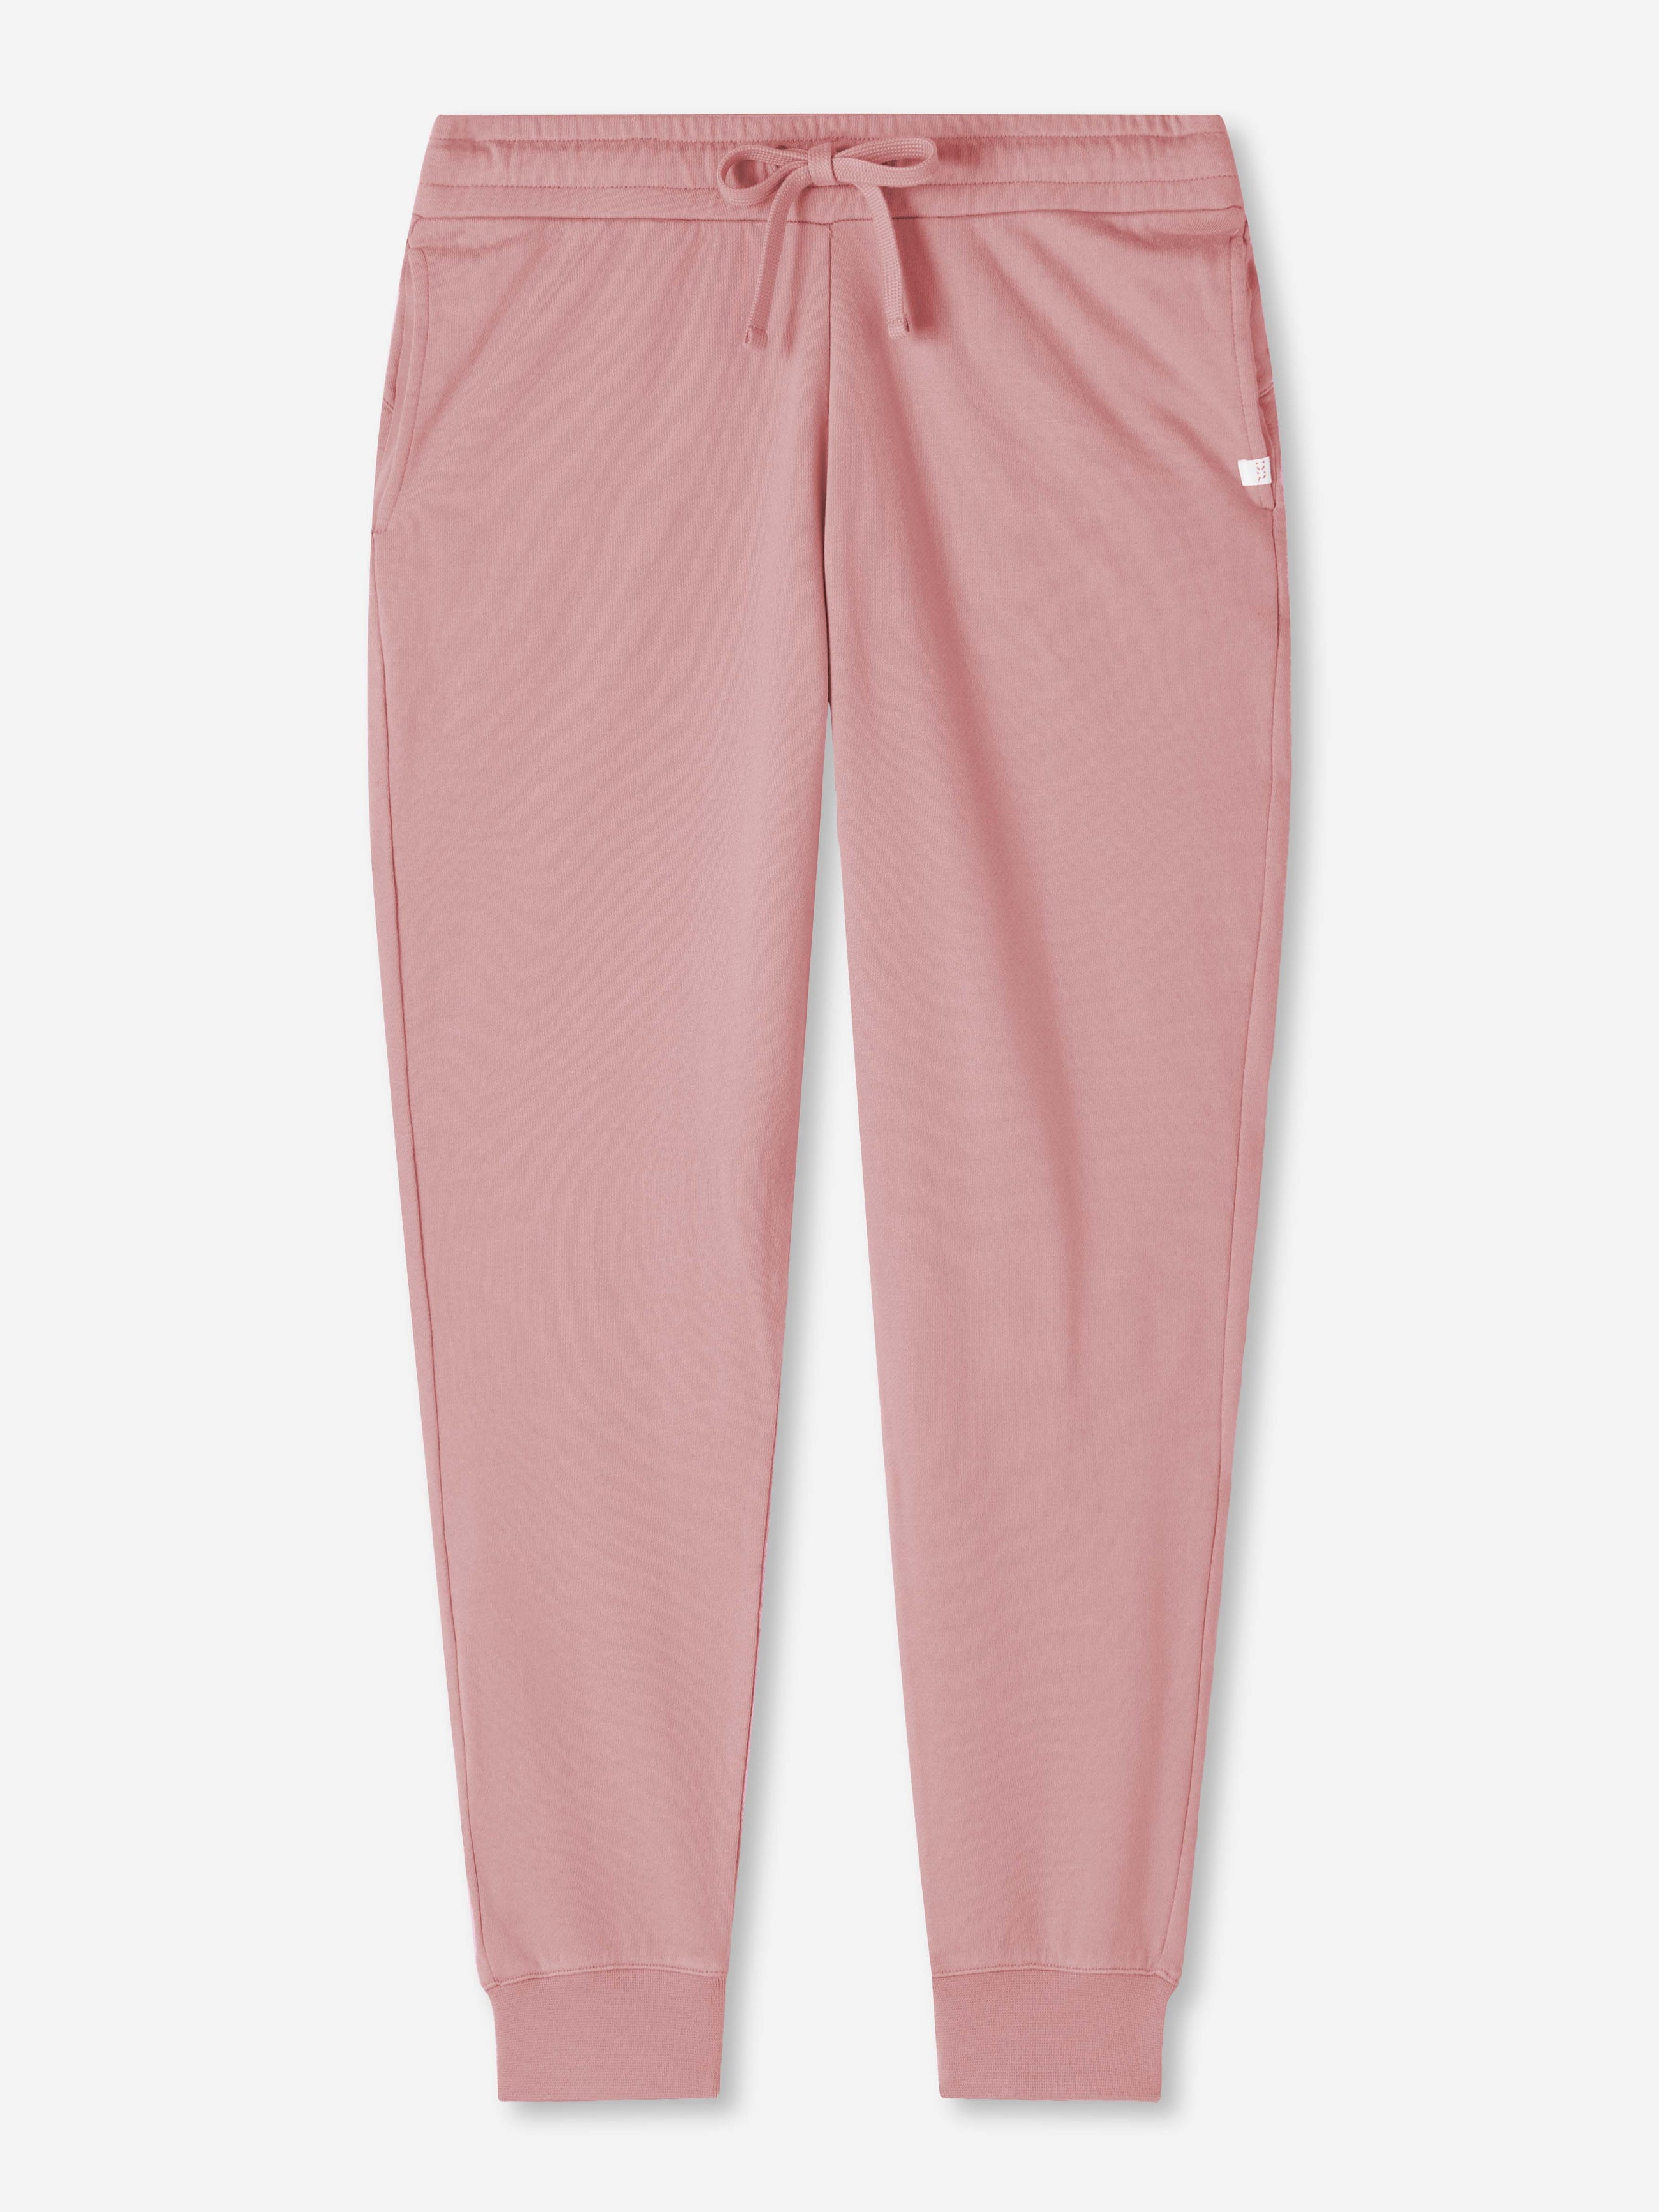 Buy Rosaline Easy Movement Cotton Track Pants - Rose Of Sharon at